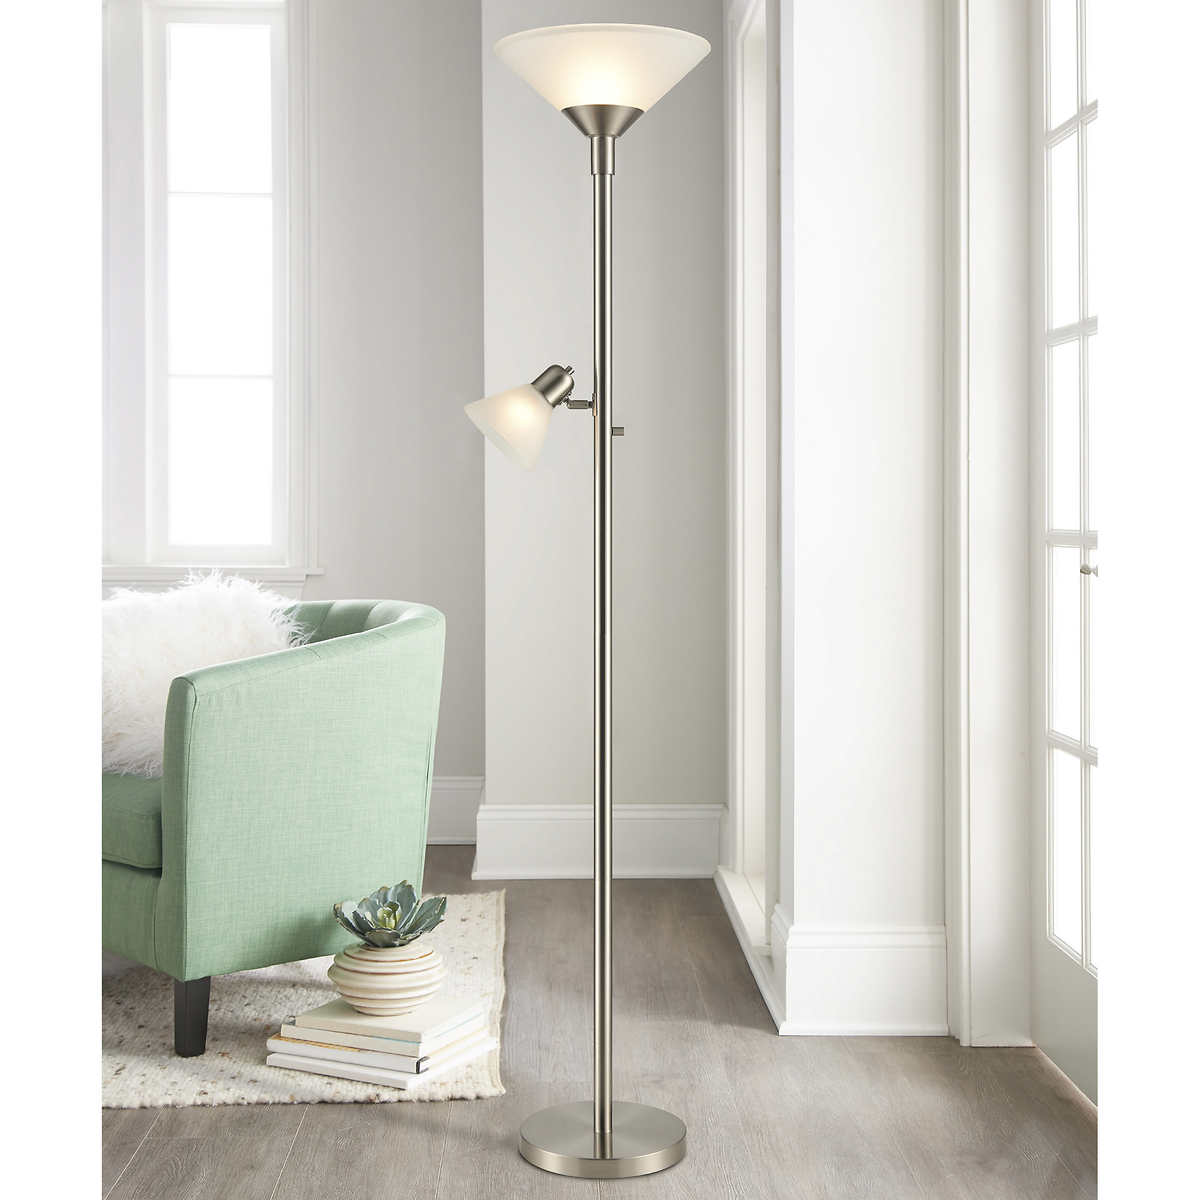 Torchiere Floor Lamp With Reading Light, Torchiere Floor Lamp